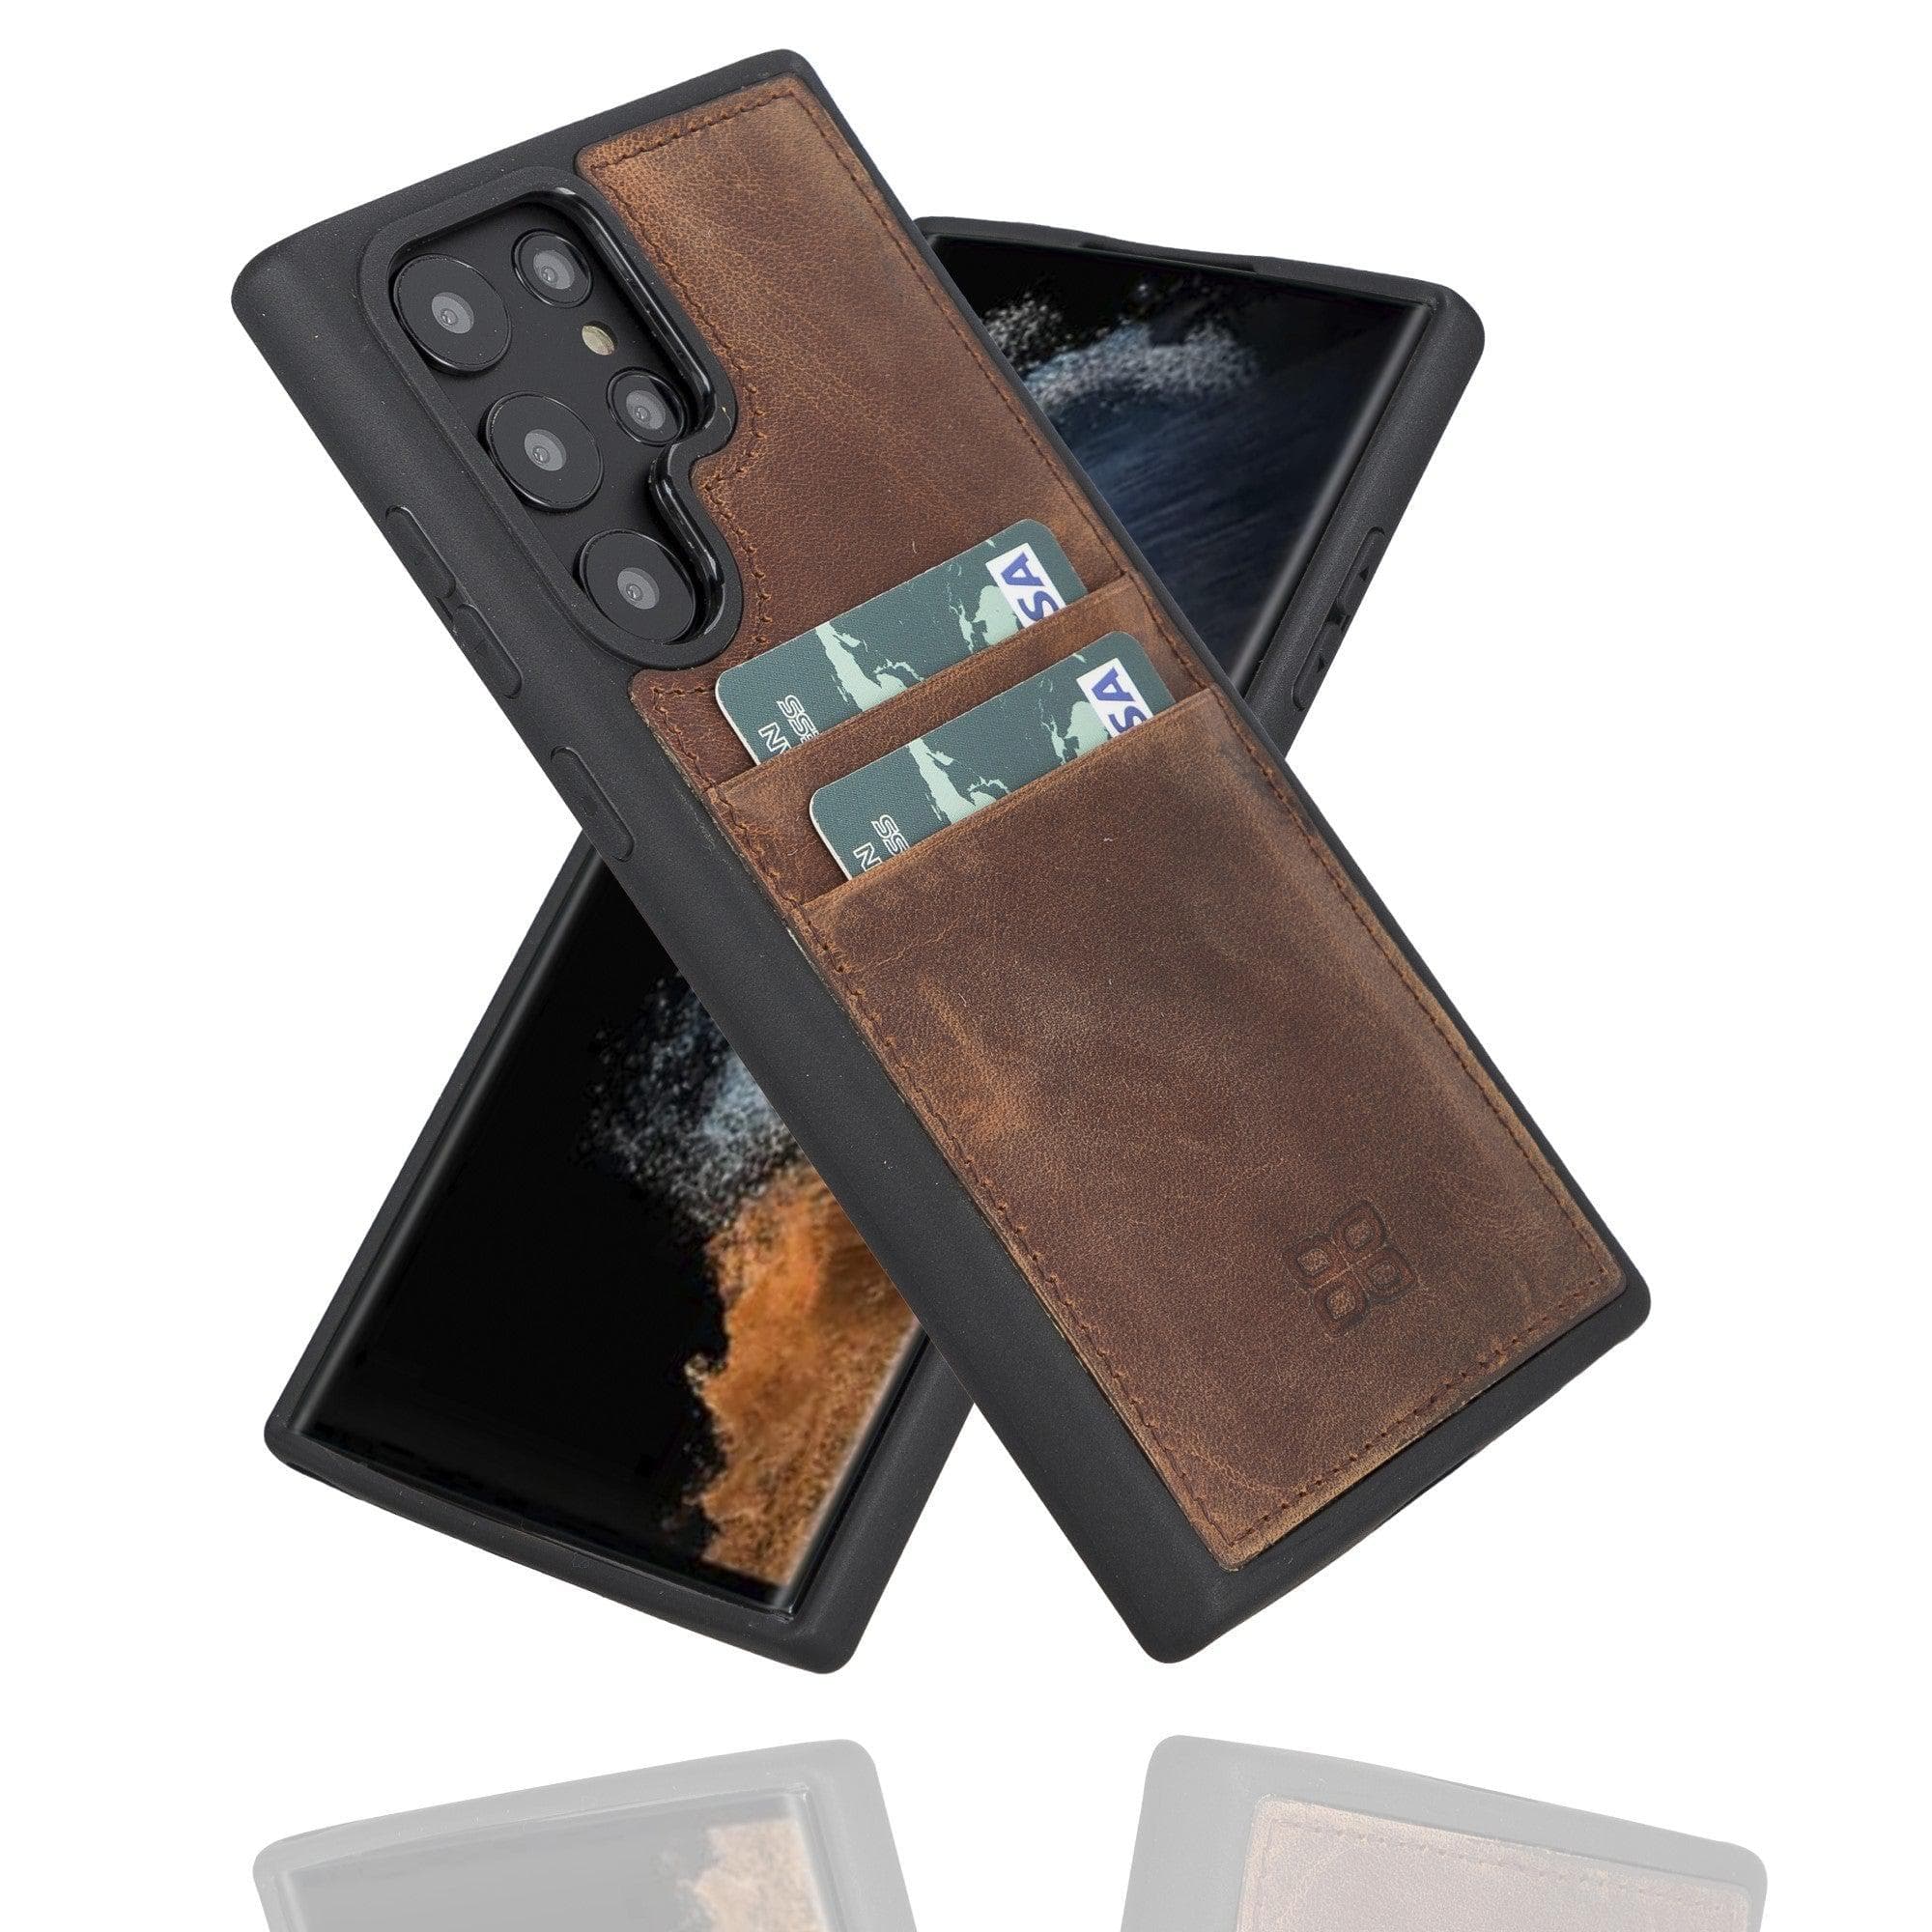 Samsung Galaxy S22 Series Genuine Leather Slim Back Cover Case with Card Holders Samsung Galaxy S22 Ultra / Antic Brown Bouletta